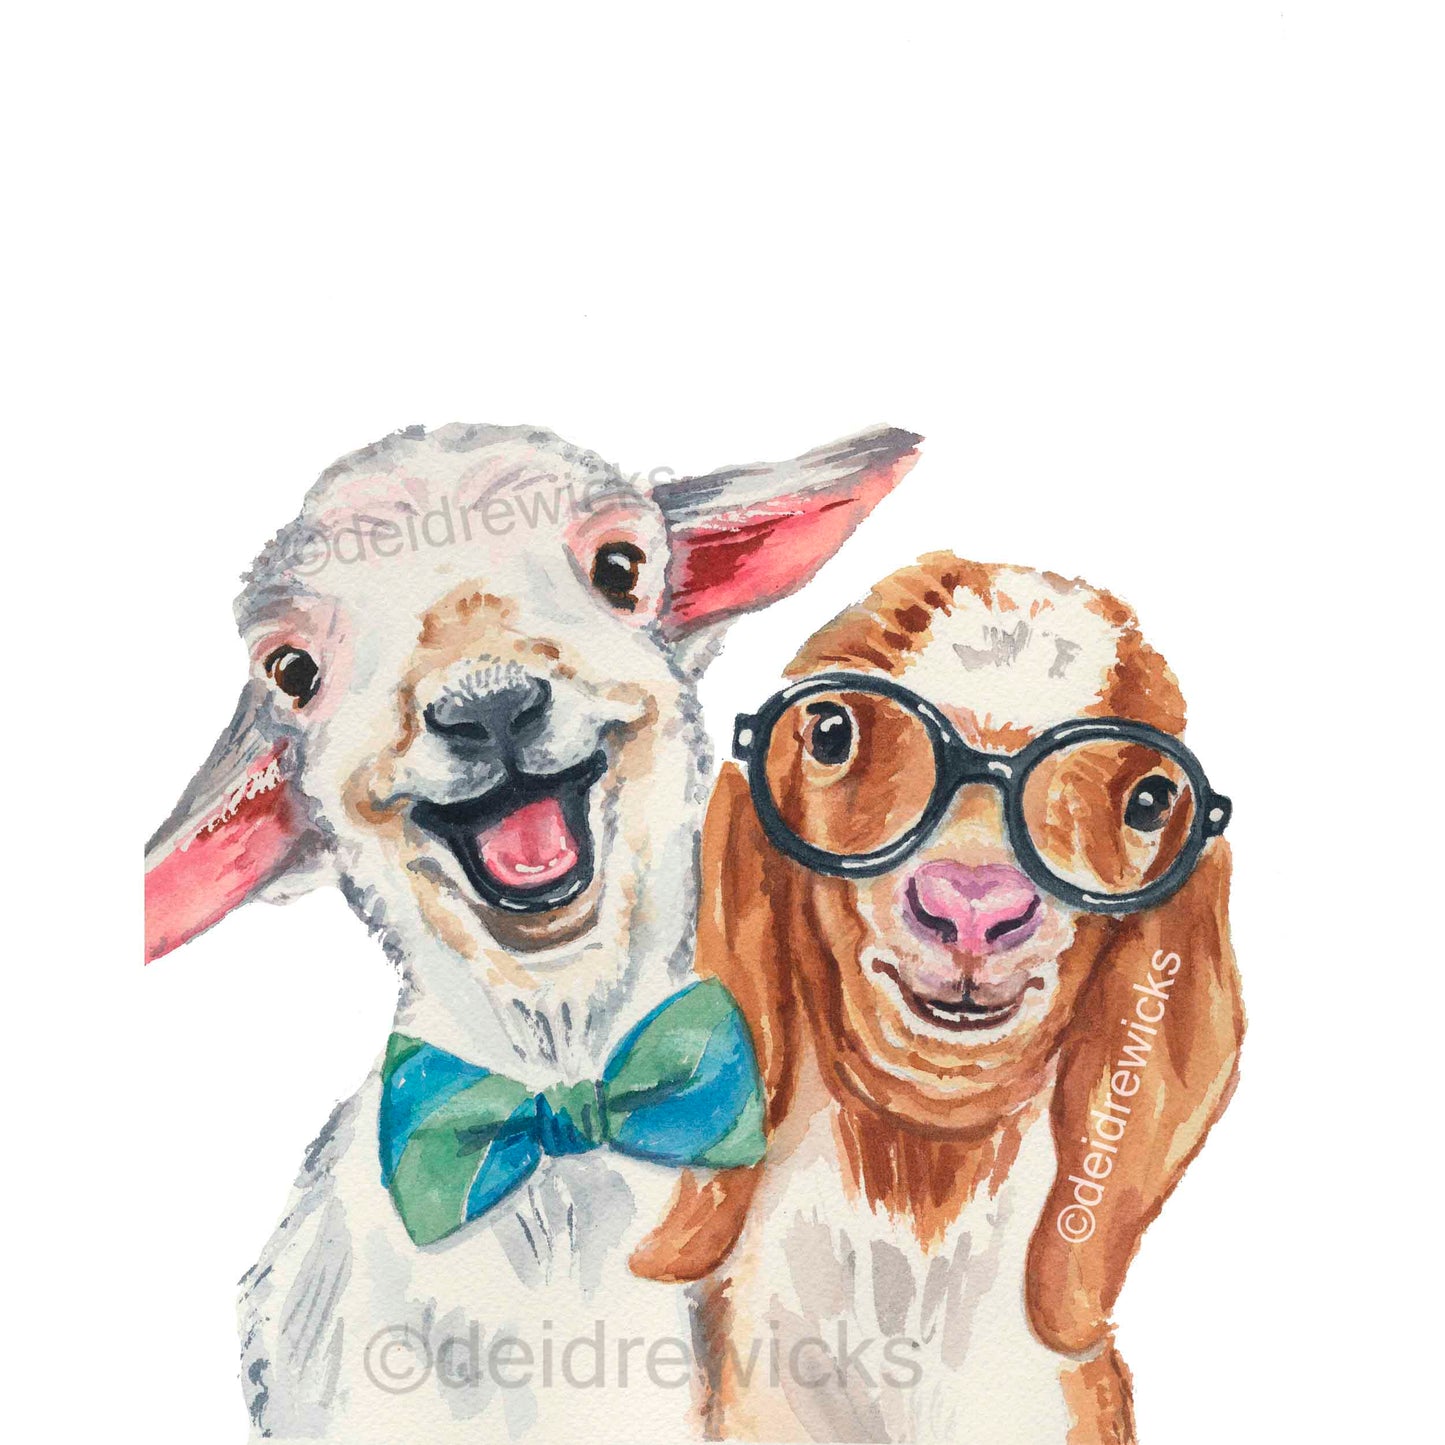 Watercolour painting of 2 best friends, a baby lamb and a baby goat